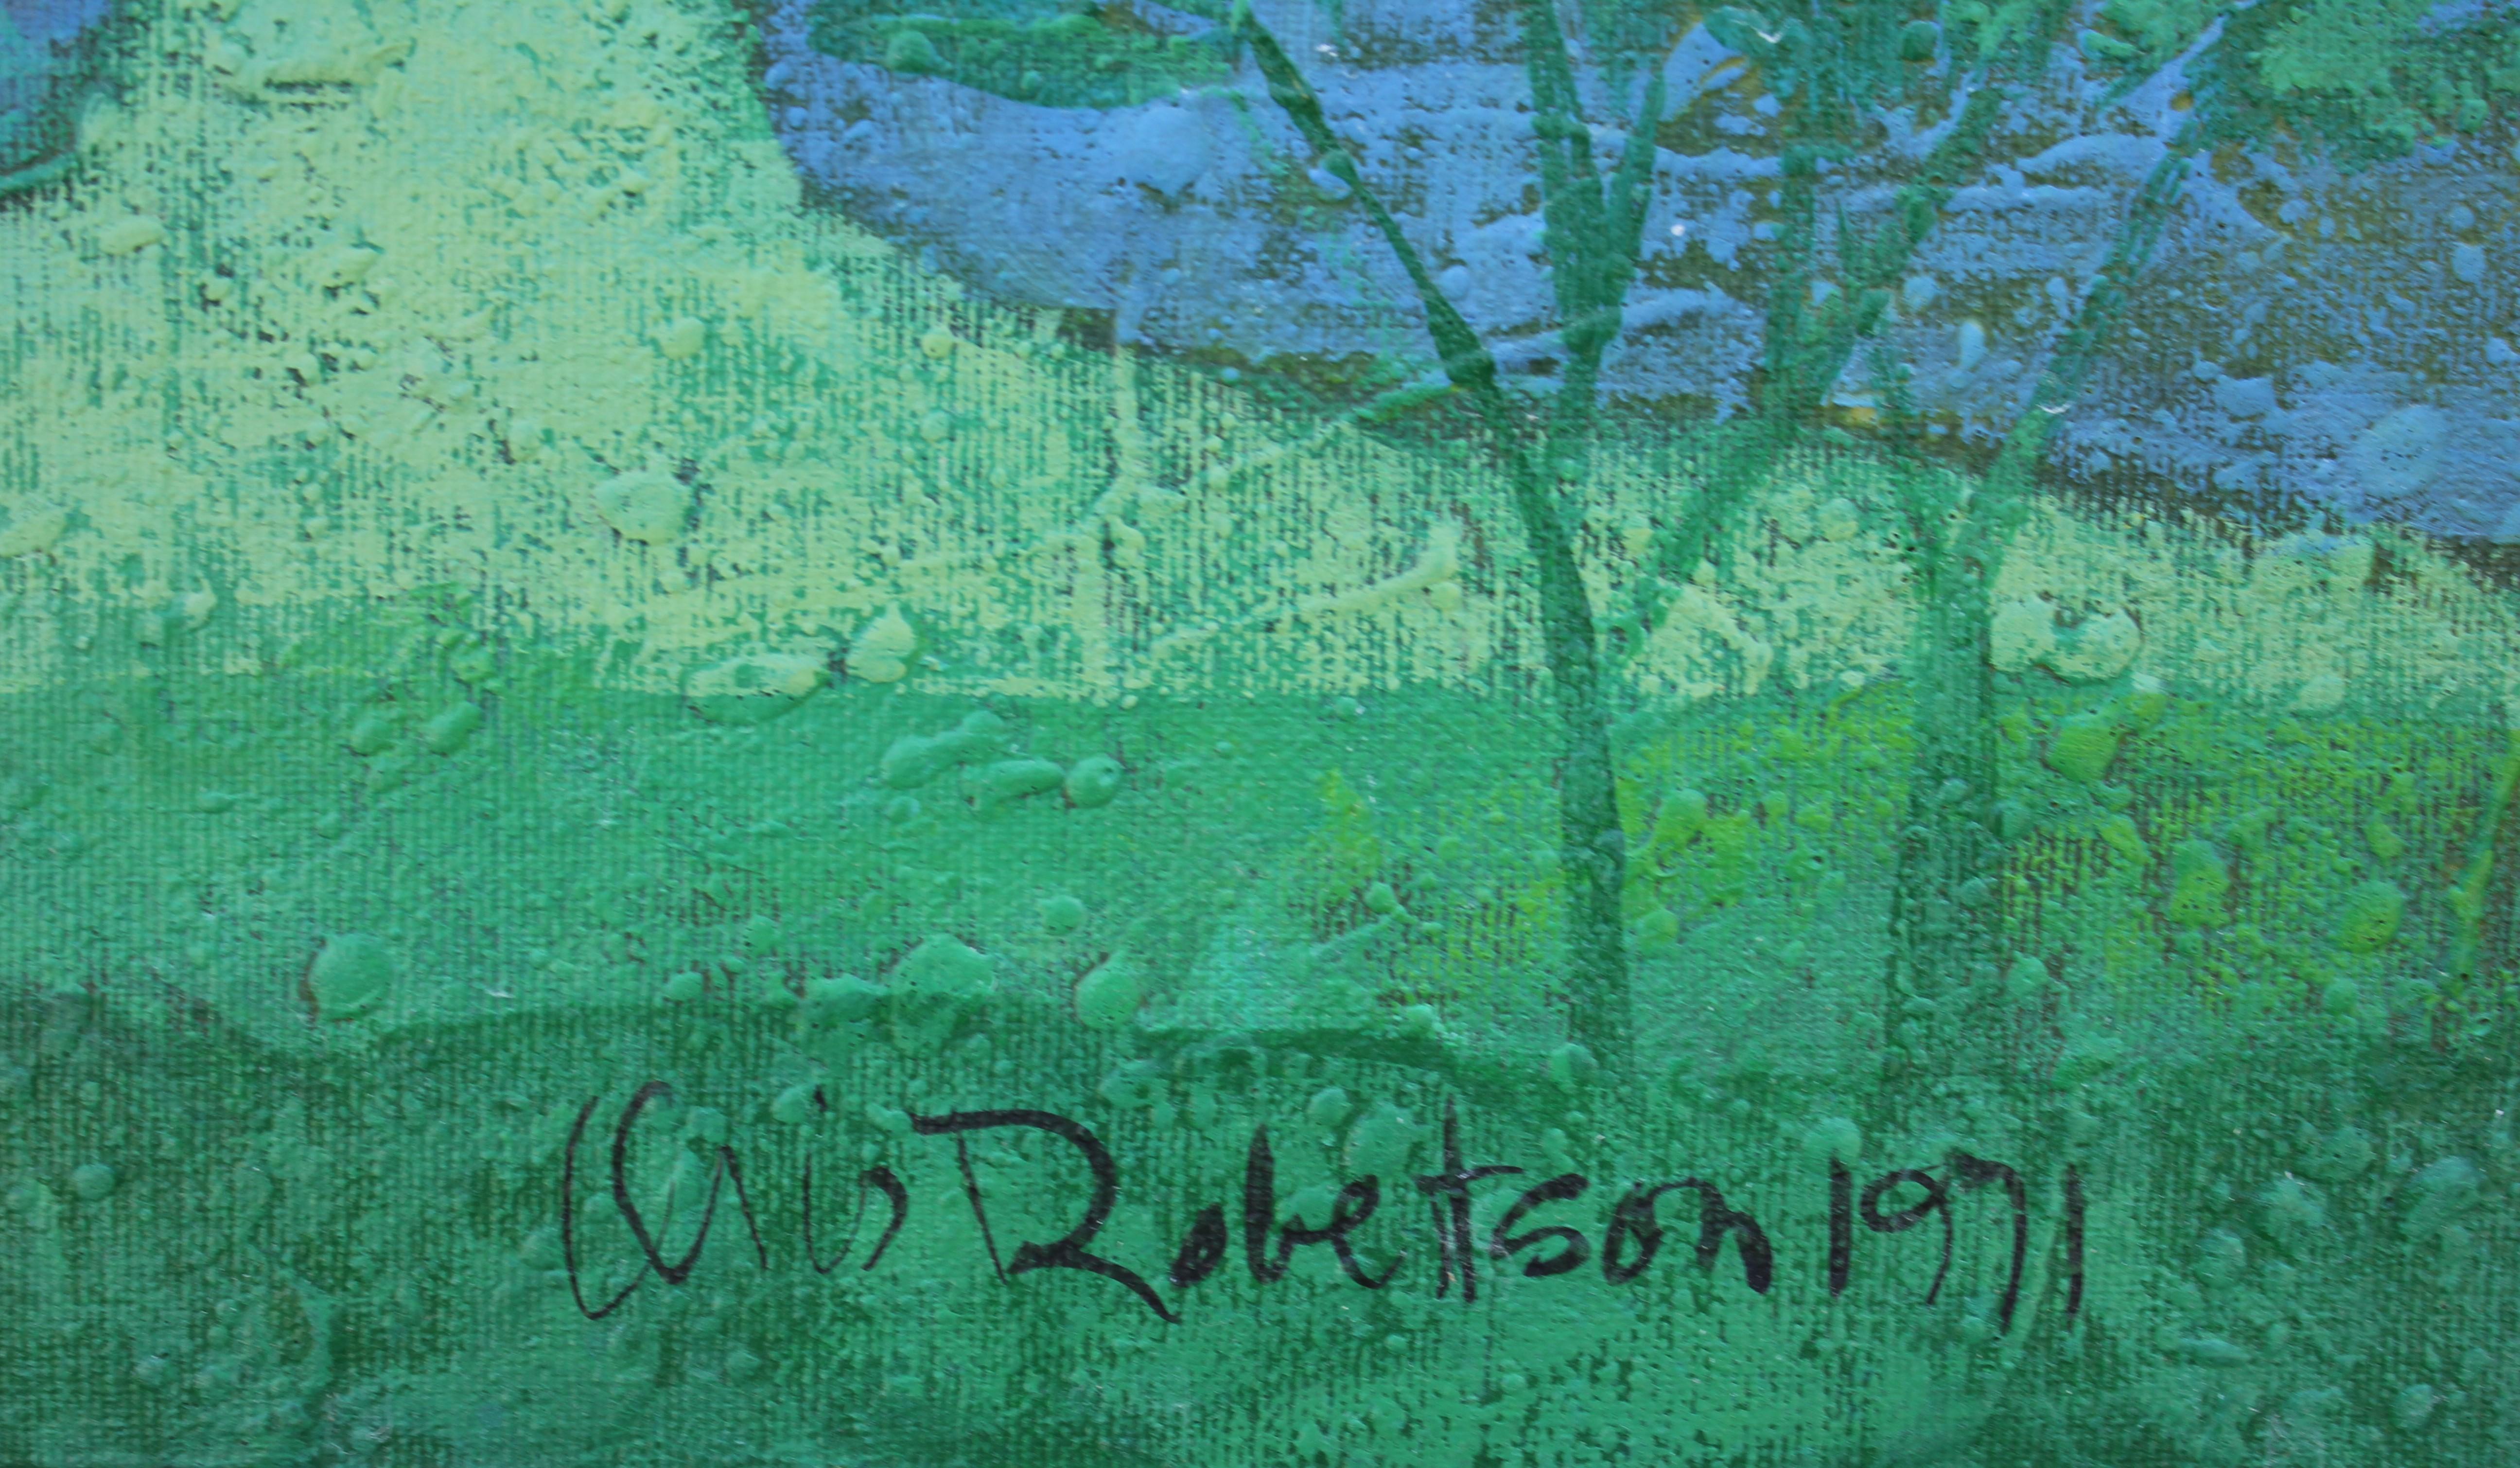 Blue, green, and purple tonal painting of a landscape in the style of David Adickes. Painting is signed and dated by the artist in the bottom right corner. 
Dimensions without frame: H 38 in x W 40 in x D .5 in 

Artist Biography: Oris Robertson was